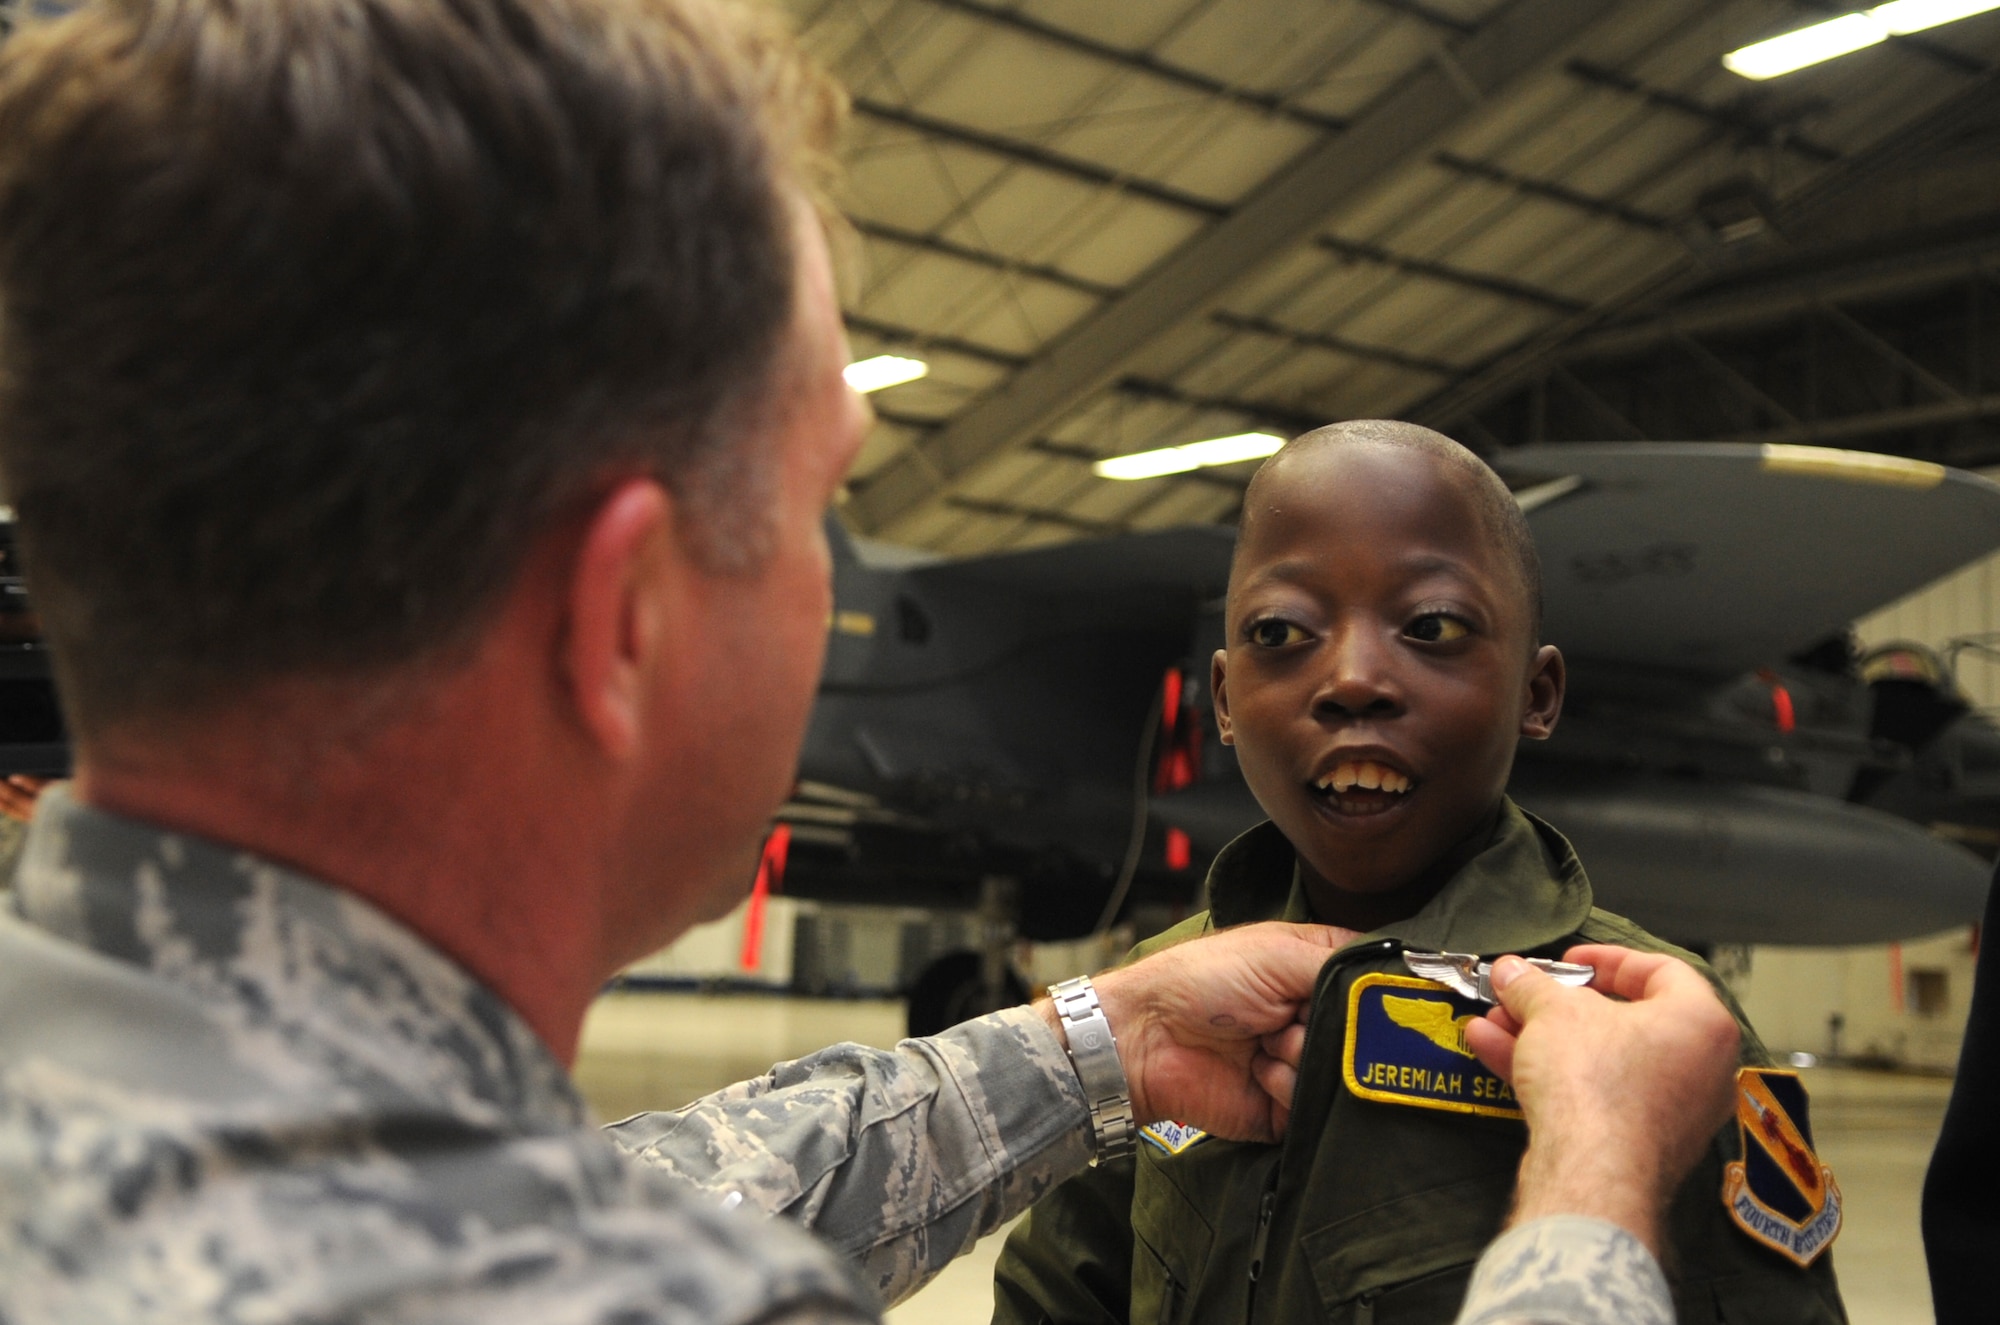 Col. Mark Slocum, 4th Fighter Wing commander, pins wings on Jeremiah Seaberry, 334th Fighter Squadron pilot for a day, during a 4th FW Pilot for a Day event, April 3, 2015, at Seymour Johnson Air Force Base, North Carolina. Earning wings is a milestone for all pilots, symbolizing the completion of their training. (U.S. Air Force photo/Senior Airman Ashley J. Thum)